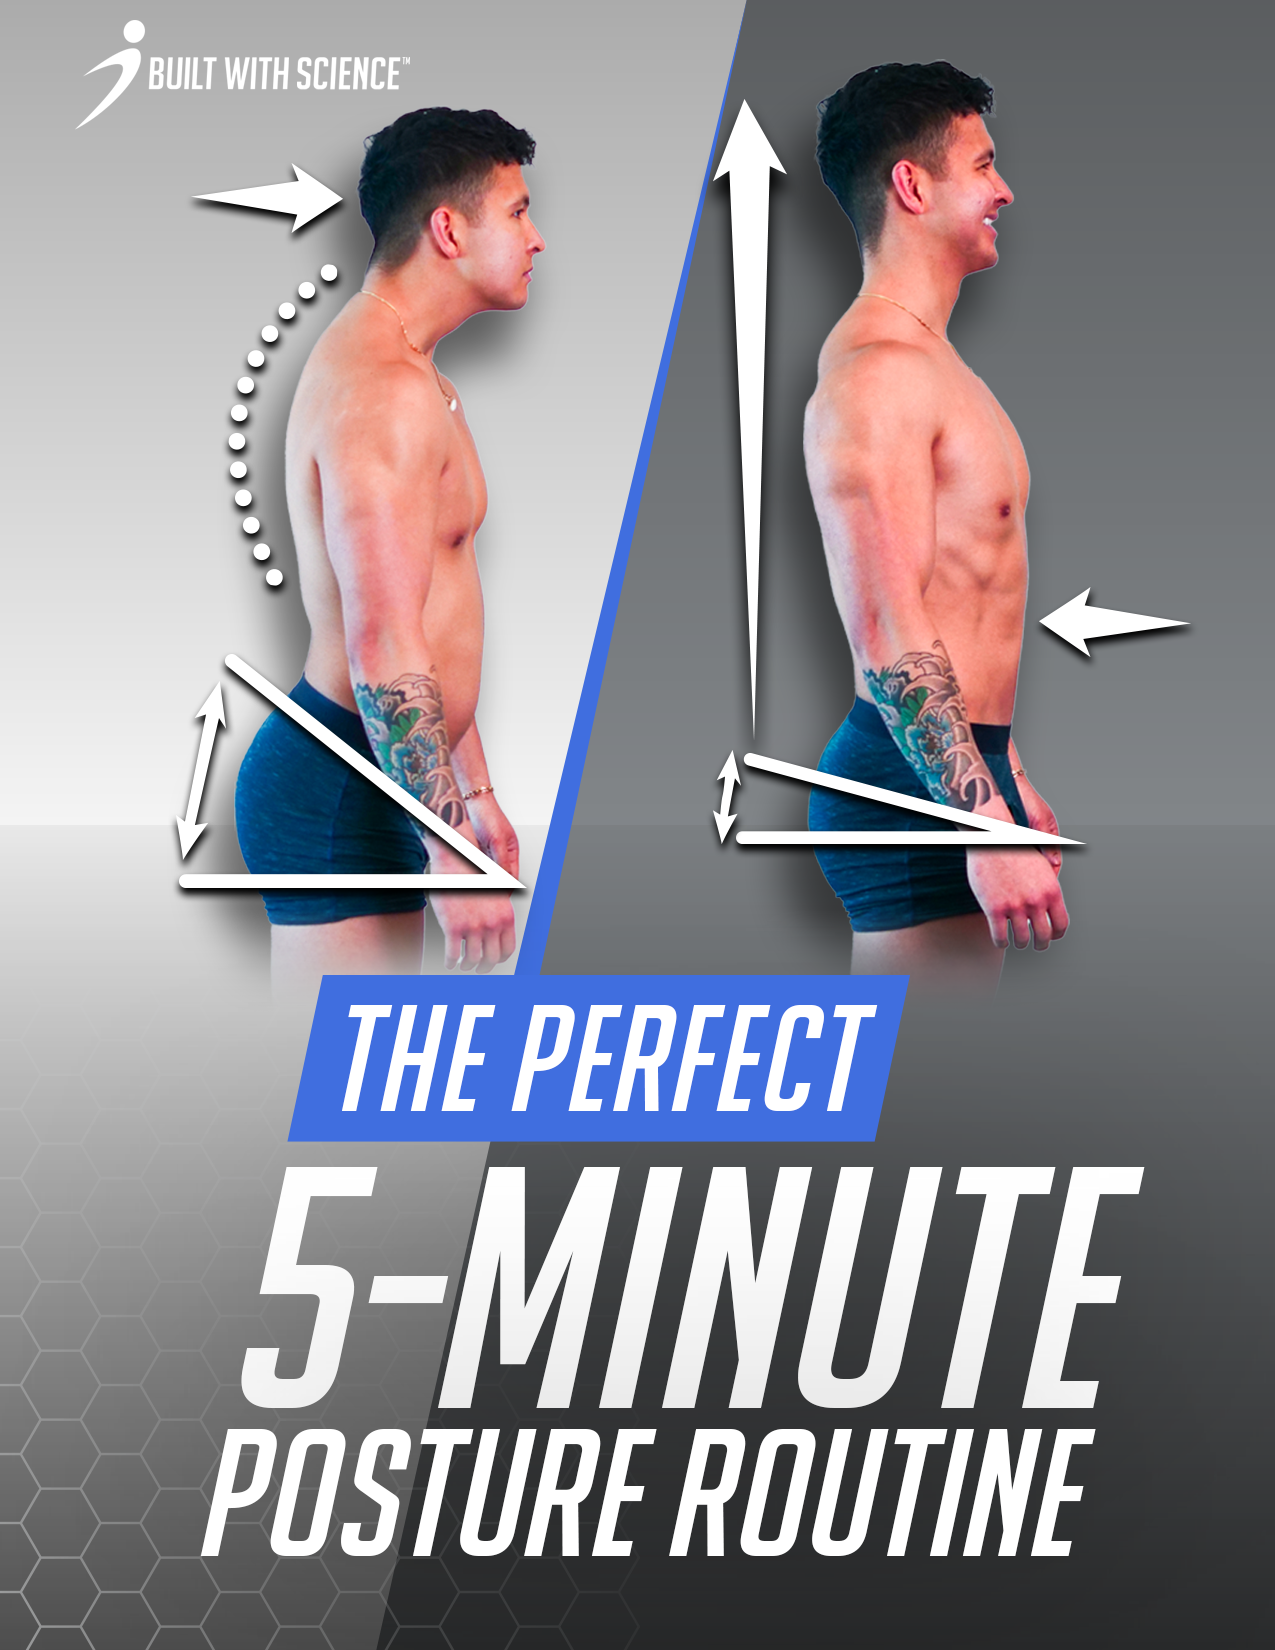 the perfect 5-minute posture routine